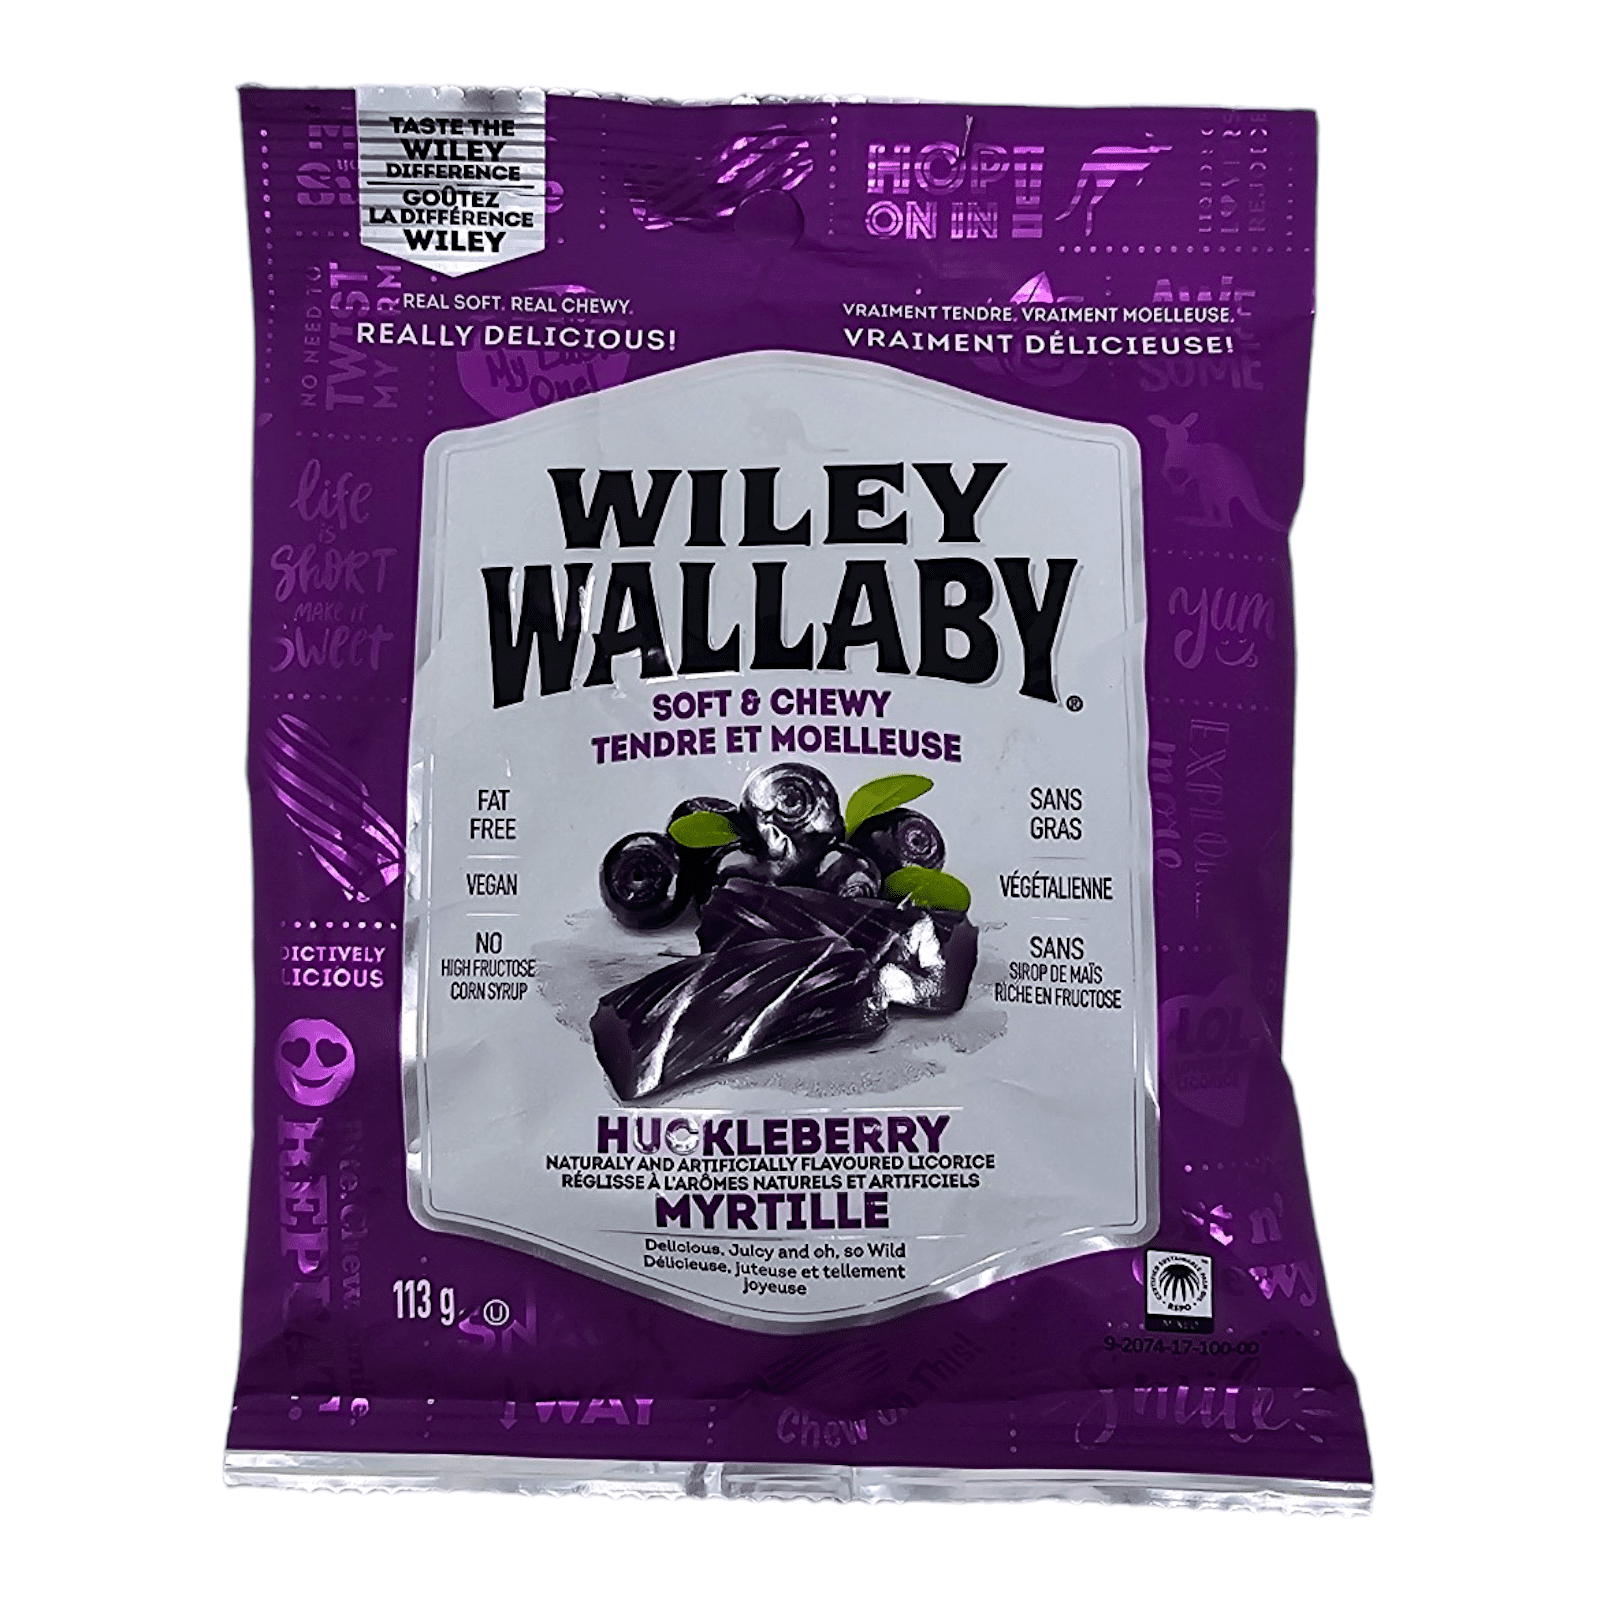 Wiley Wallaby Huckleberry Licorice (113g)